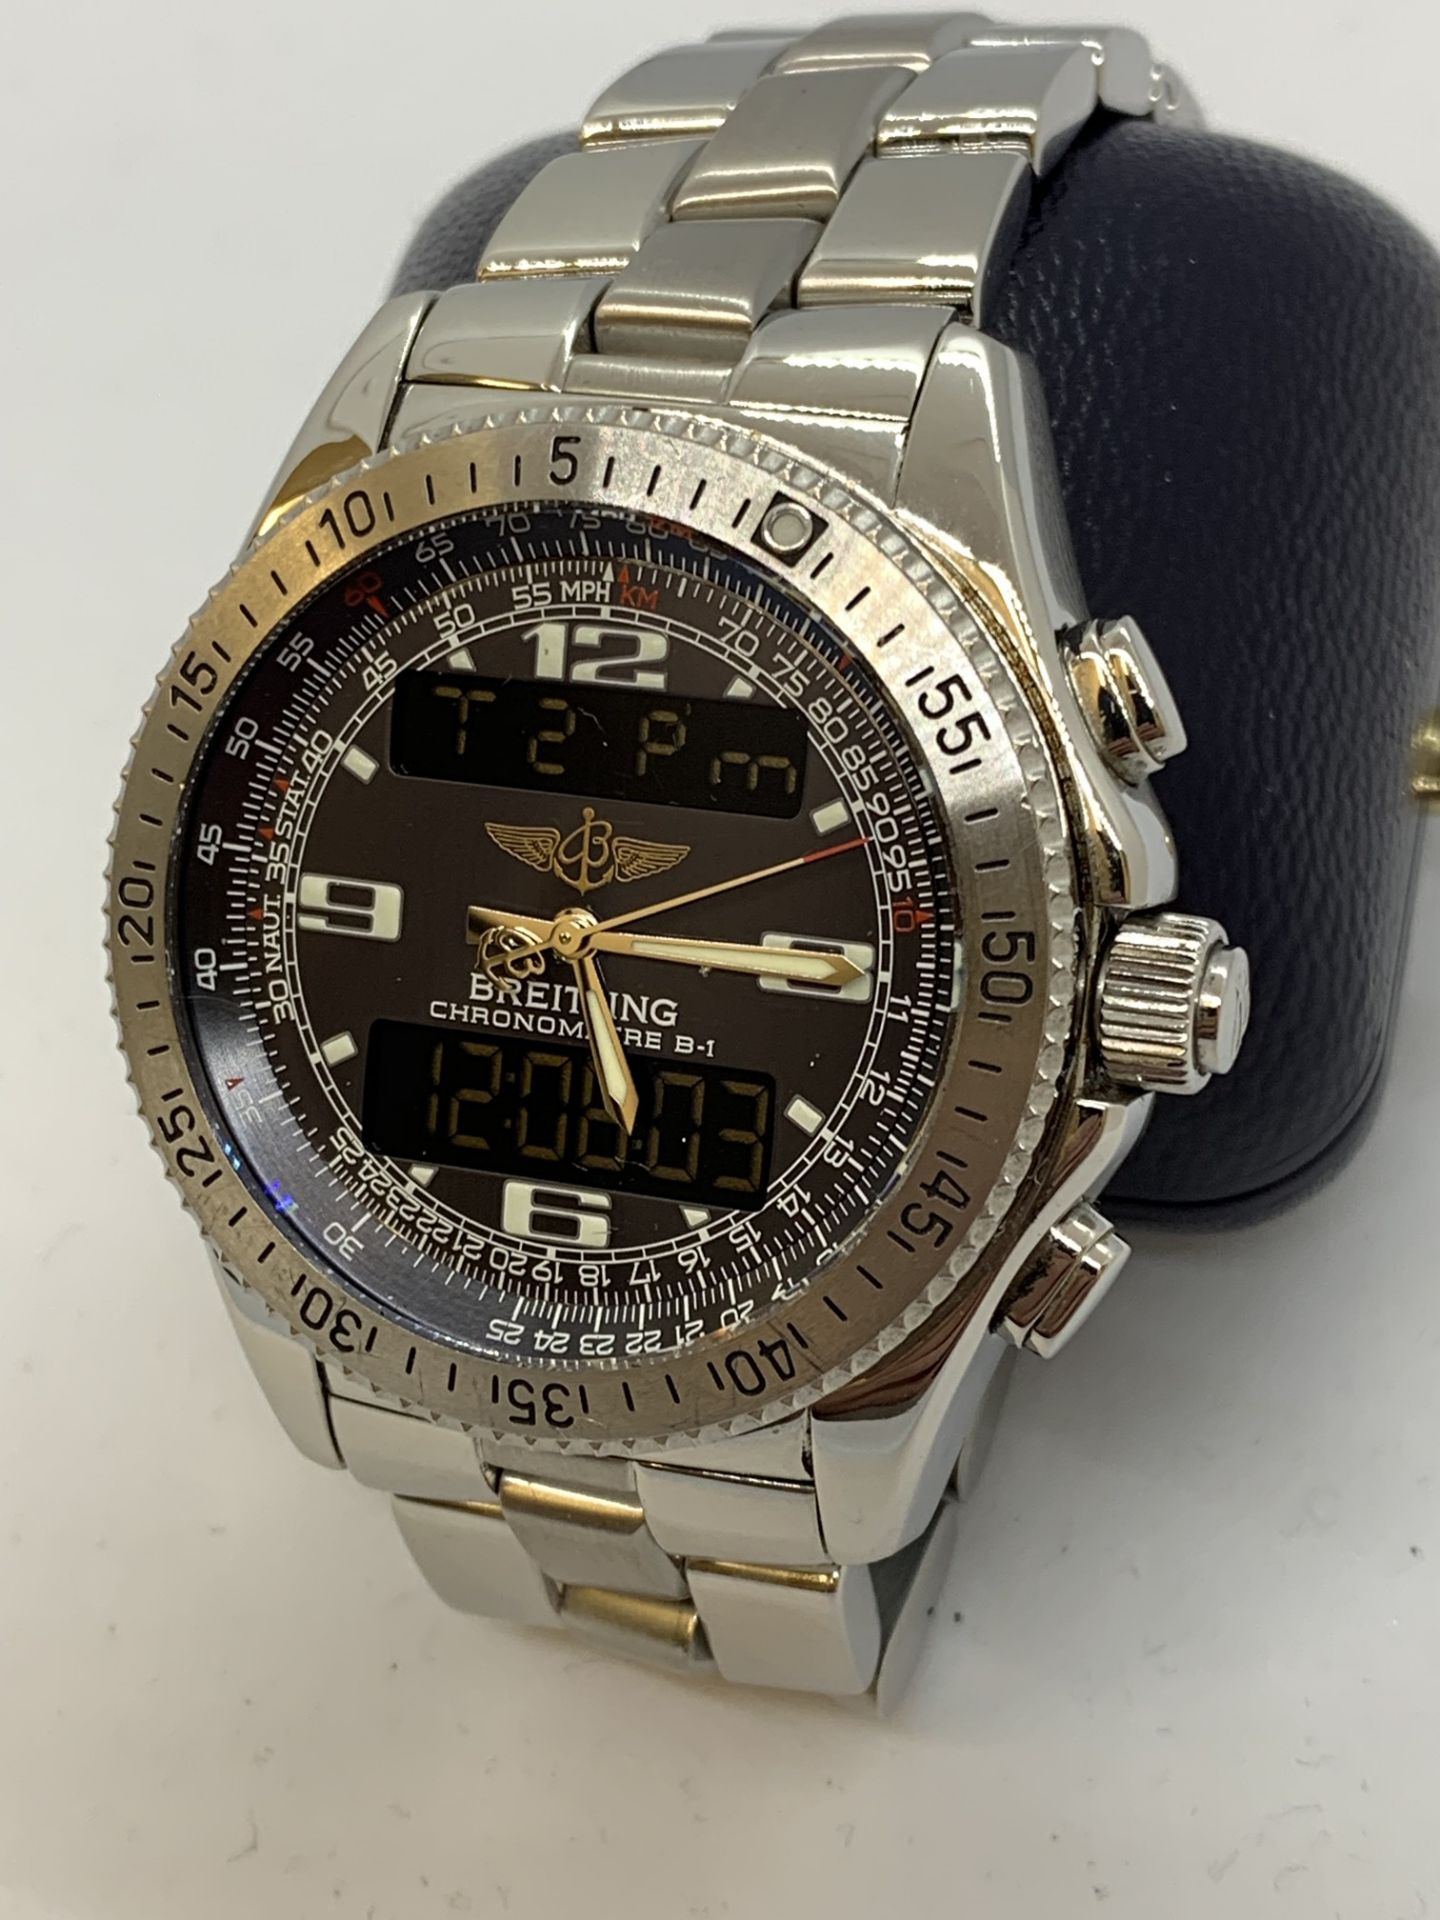 BREITLING CHRONO A78362 STAINLESS STEEL WATCH - Image 3 of 9